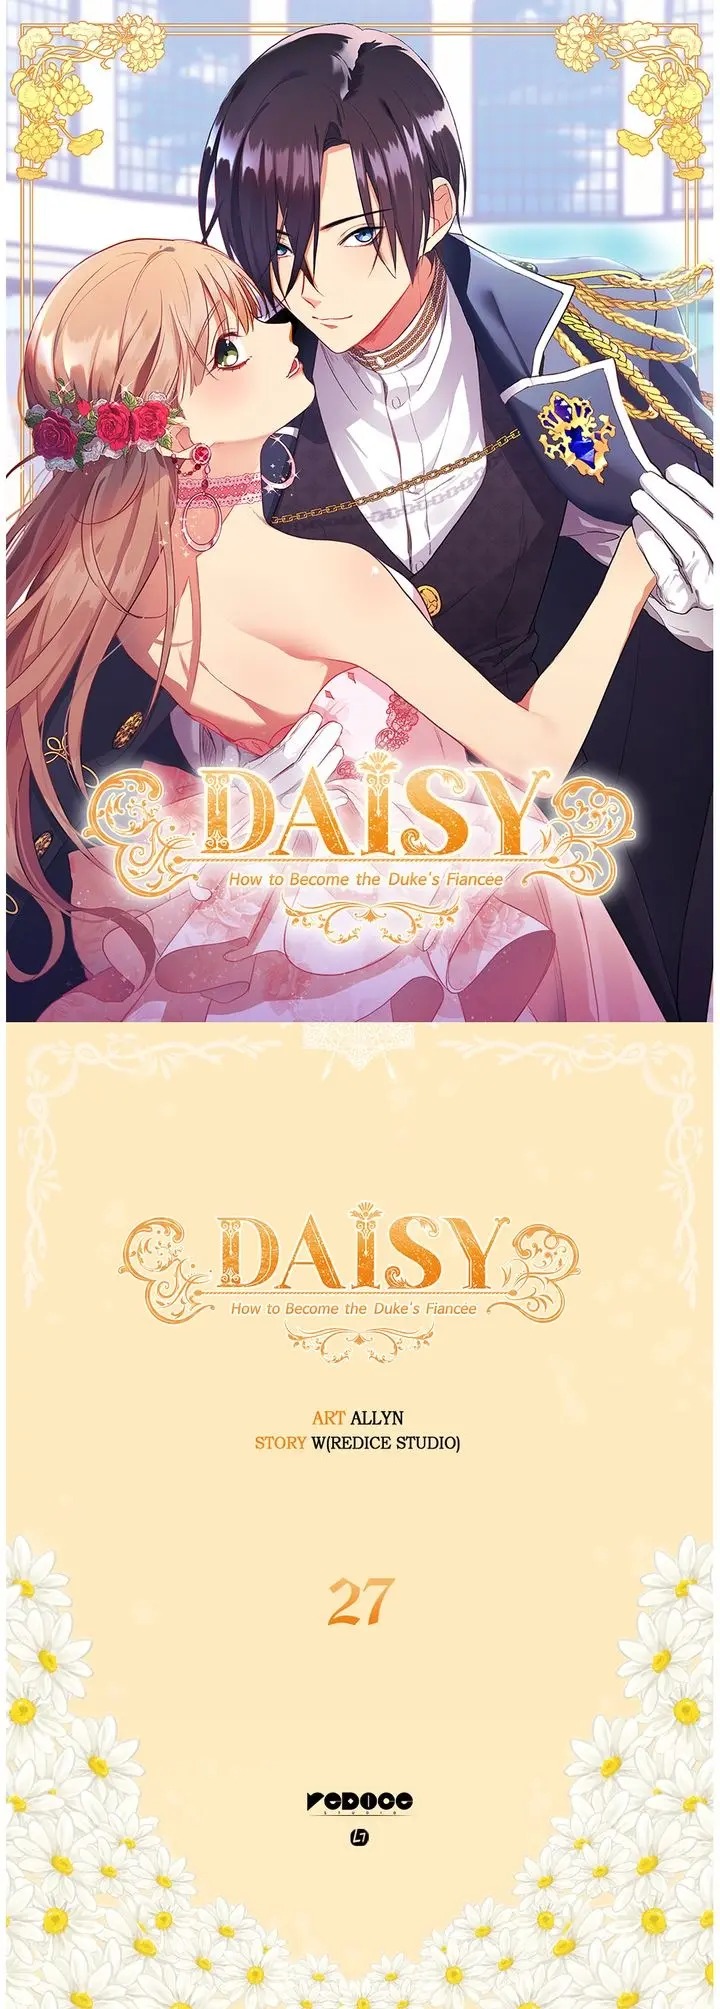 Daisy: How to Become the Duke’s Fiancée chapter 27